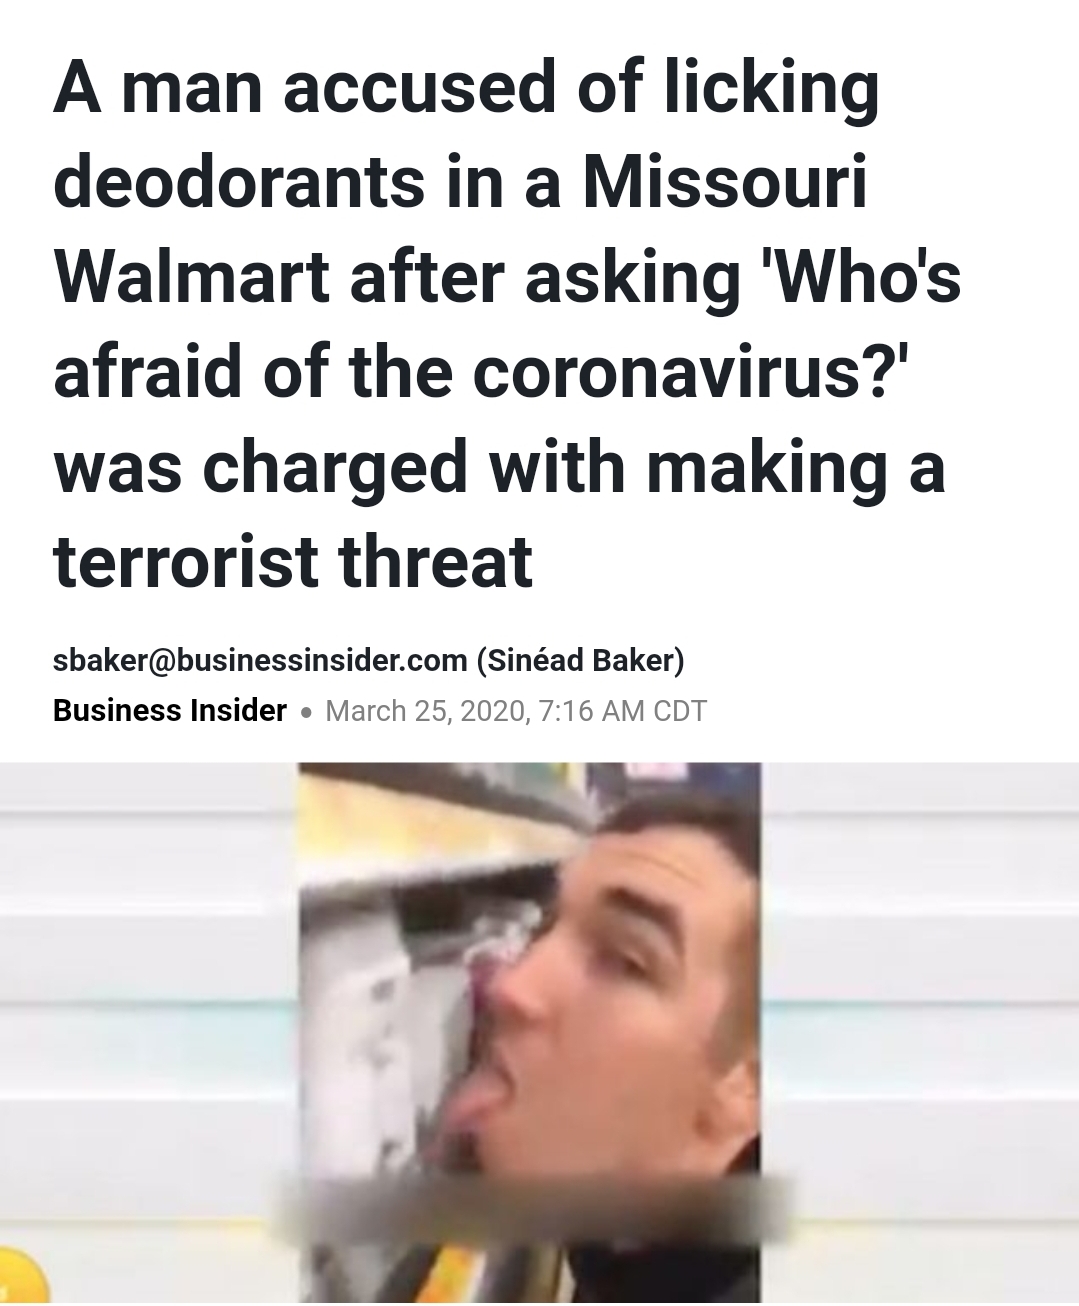 mouth - A man accused of licking deodorants in a Missouri Walmart after asking 'Who's afraid of the coronavirus?' was charged with making a terrorist threat sbaker.com Sinad Baker Business Insider , Cdt